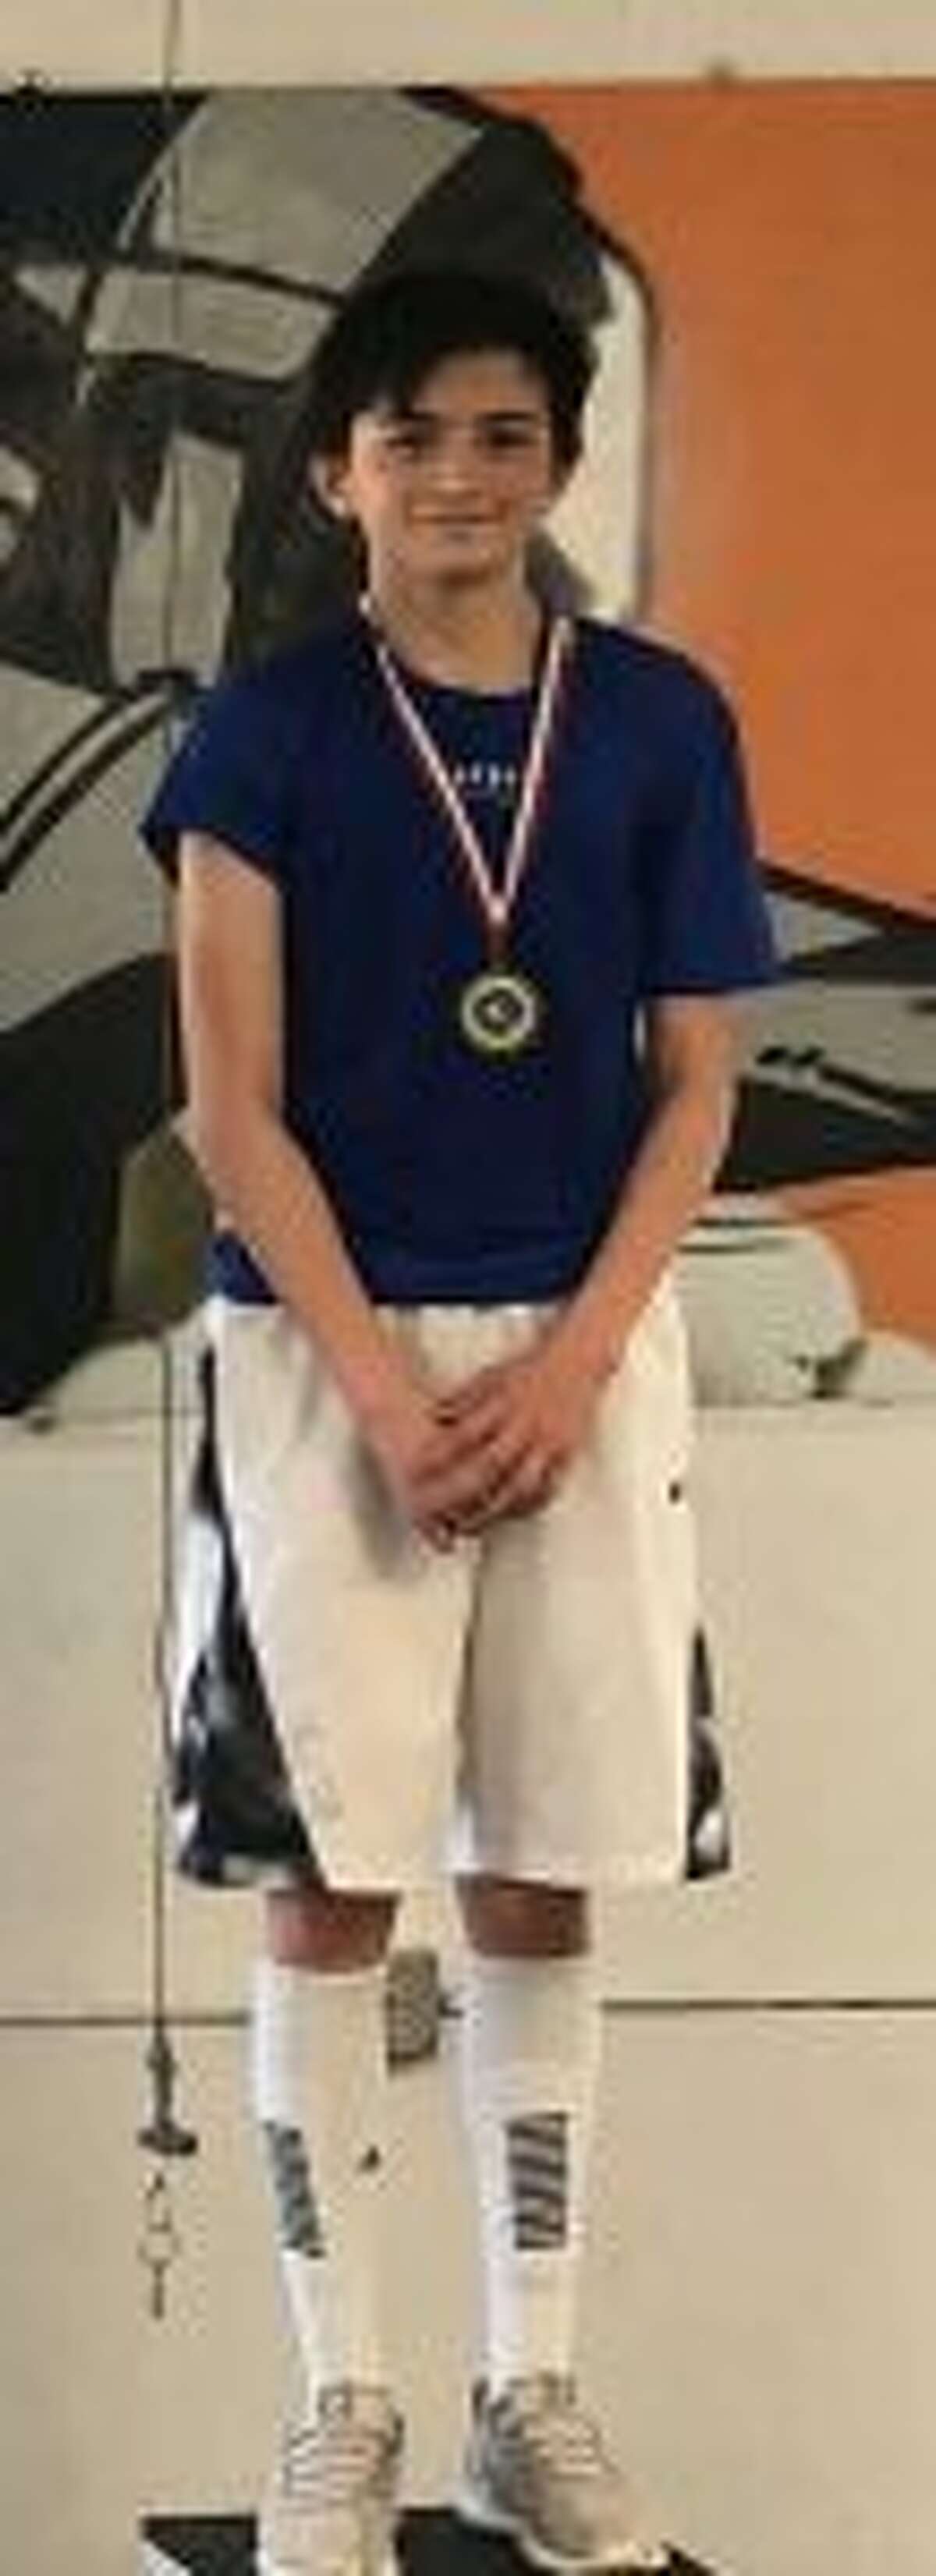 Alex Liao won a gold medal at the Summer Nationals.